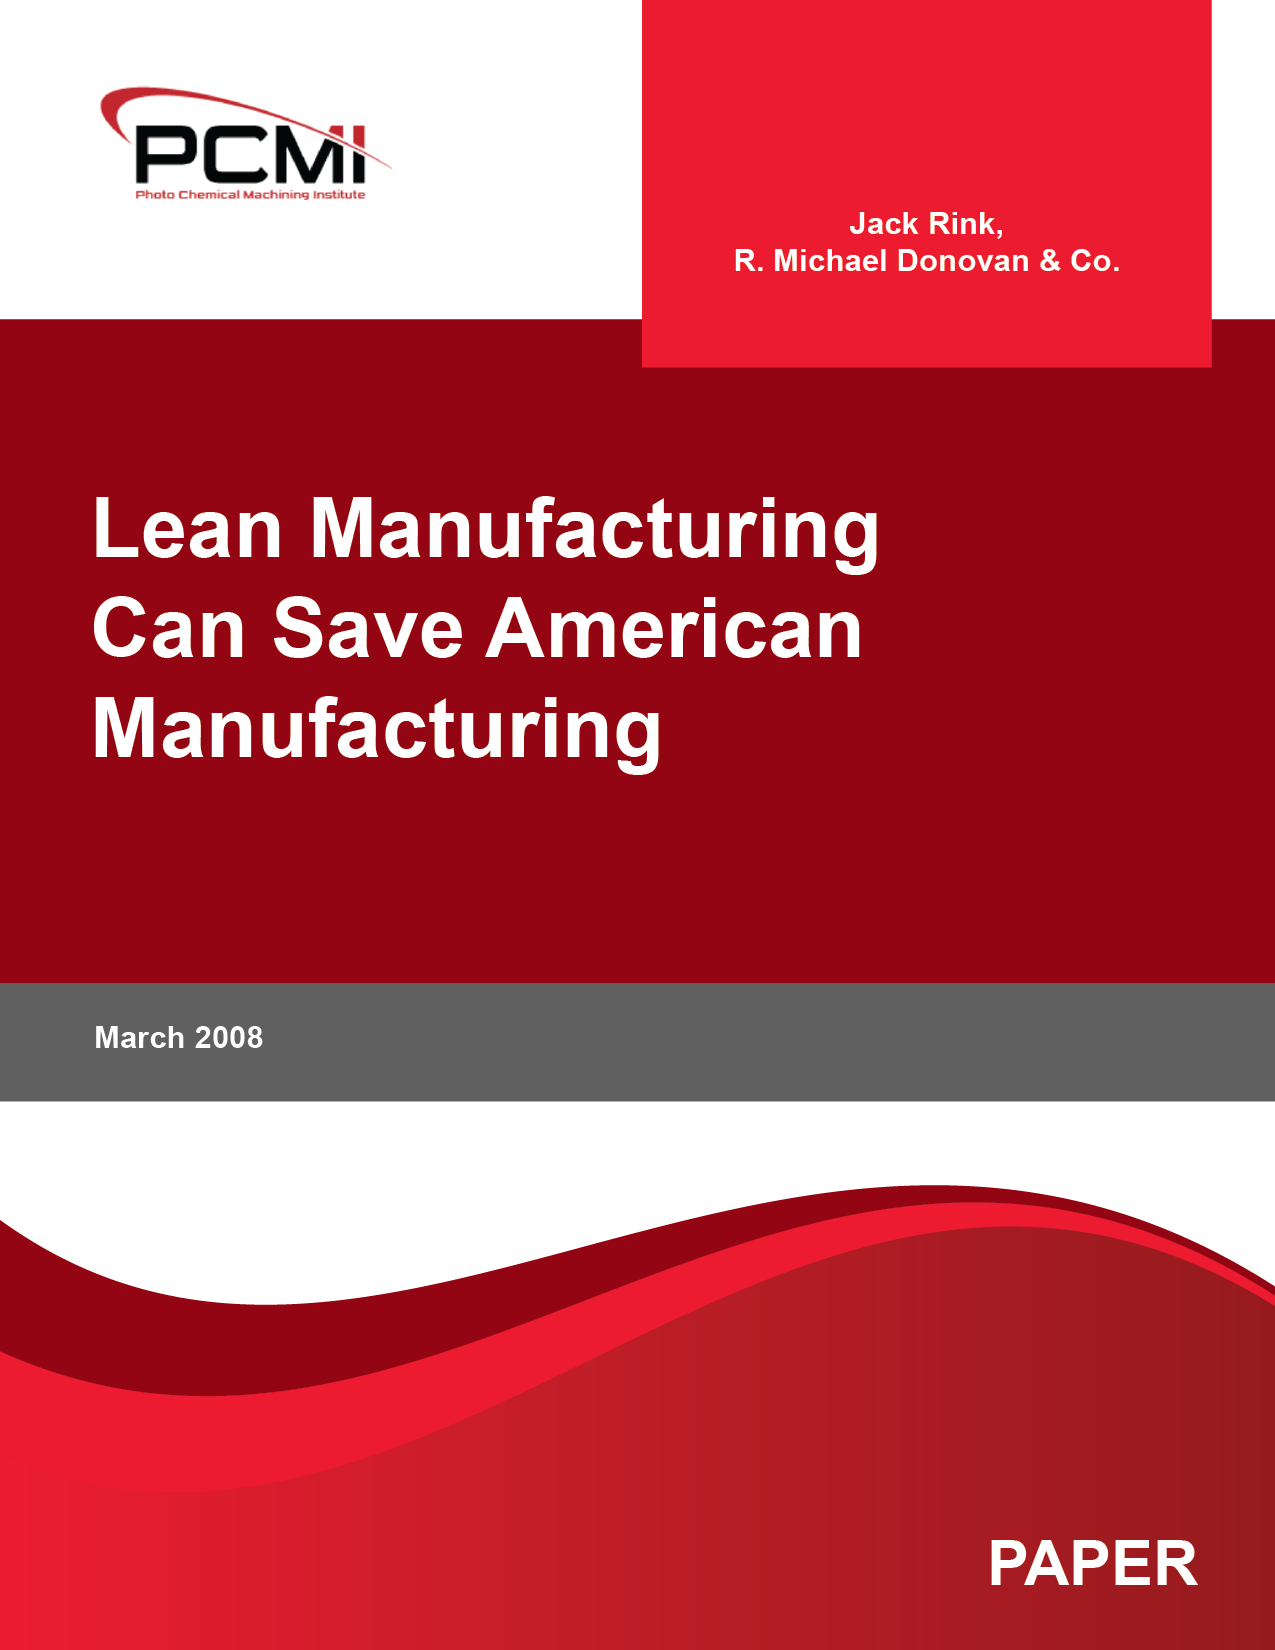 Lean Manufacturing Can Save American Manufacturing